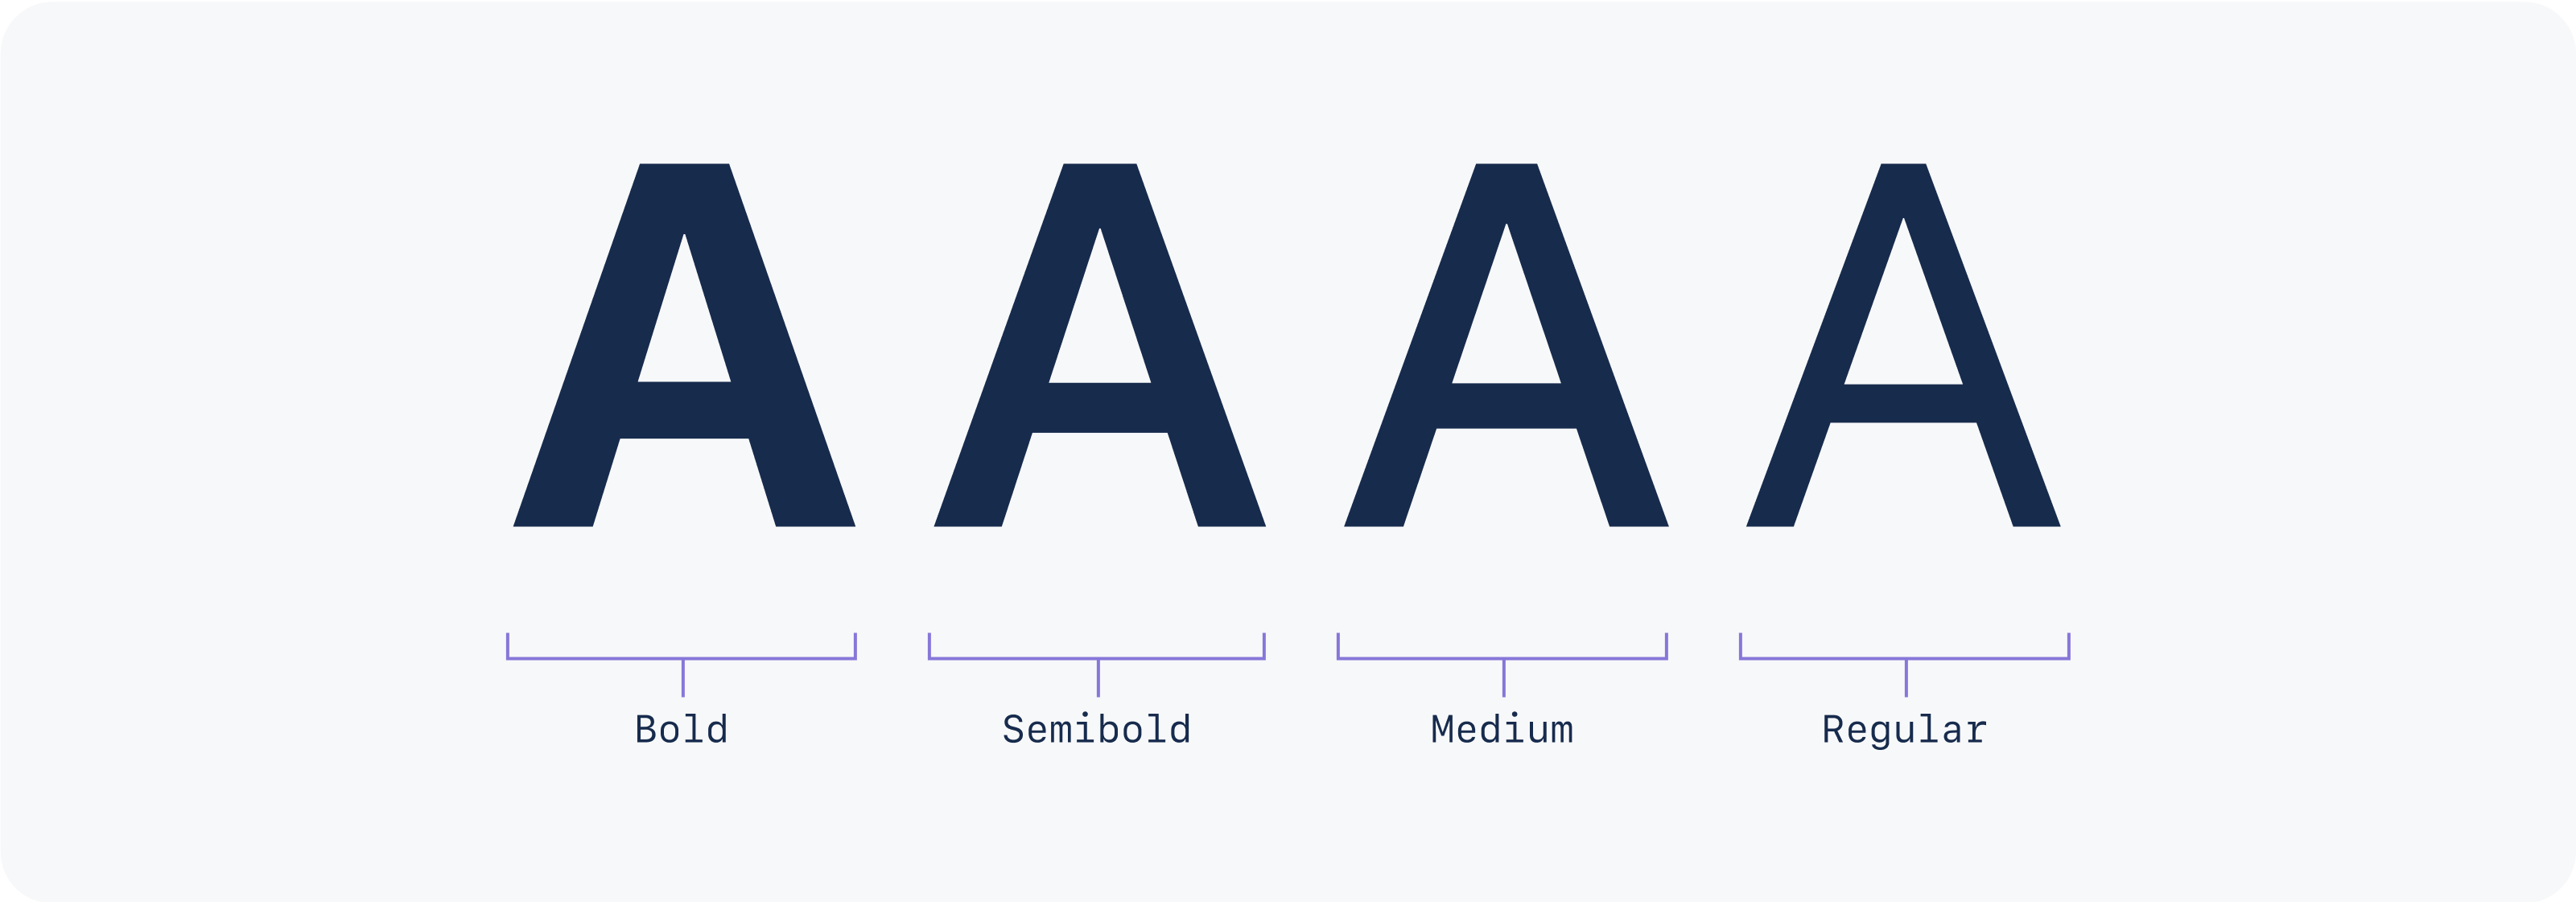 A visual of the four font weights, from right to left: Bold, Semibold, Medium and Regular.